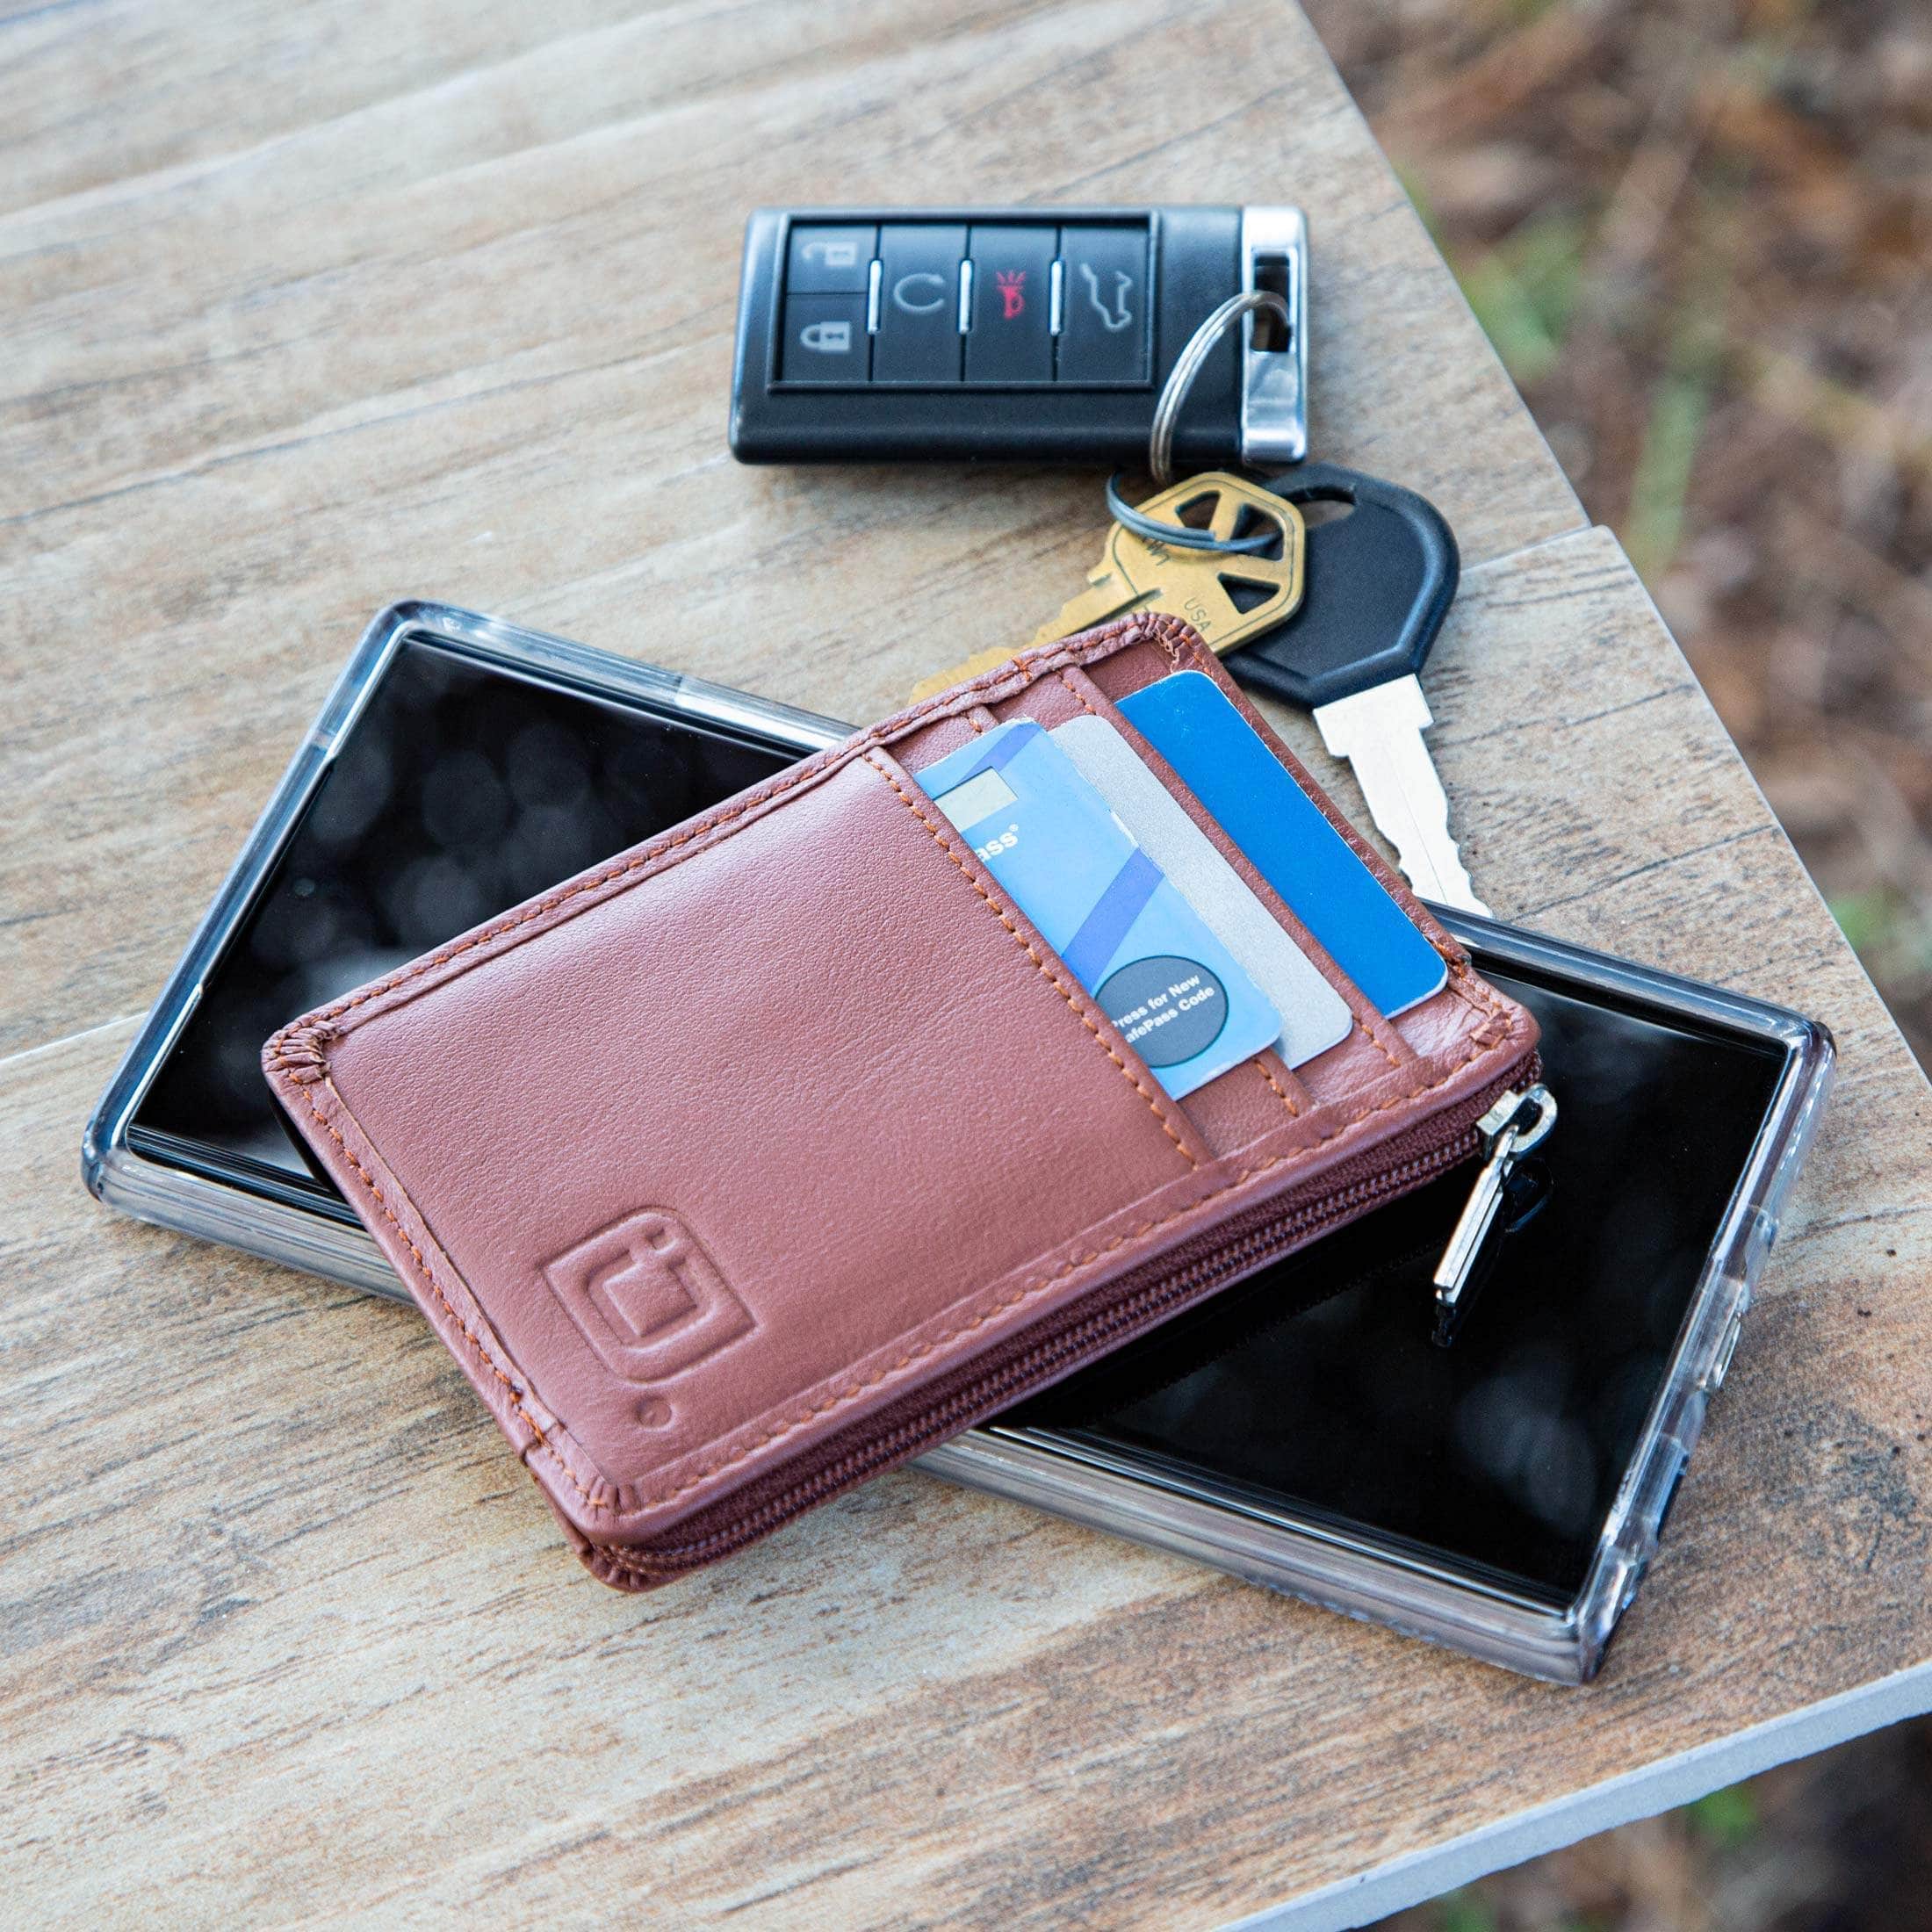 Slim Leather ID/Credit Card Holder Long Wallet with RFID Blocking